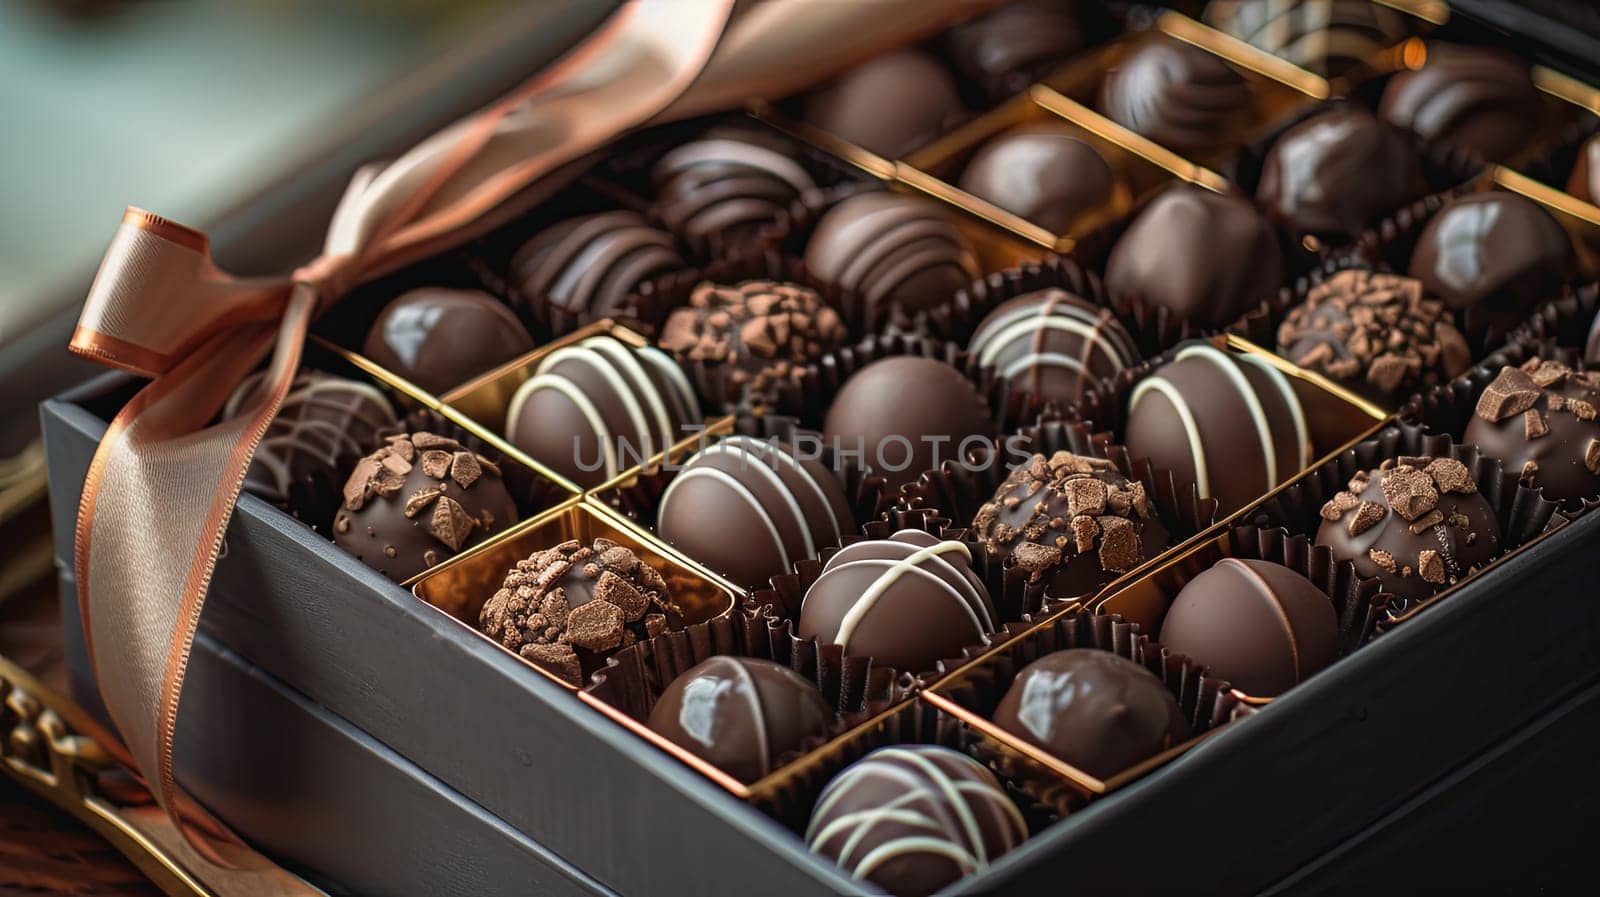 A detailed, elegant box of chocolate truffles adorned with ribbons in rich dark colors.